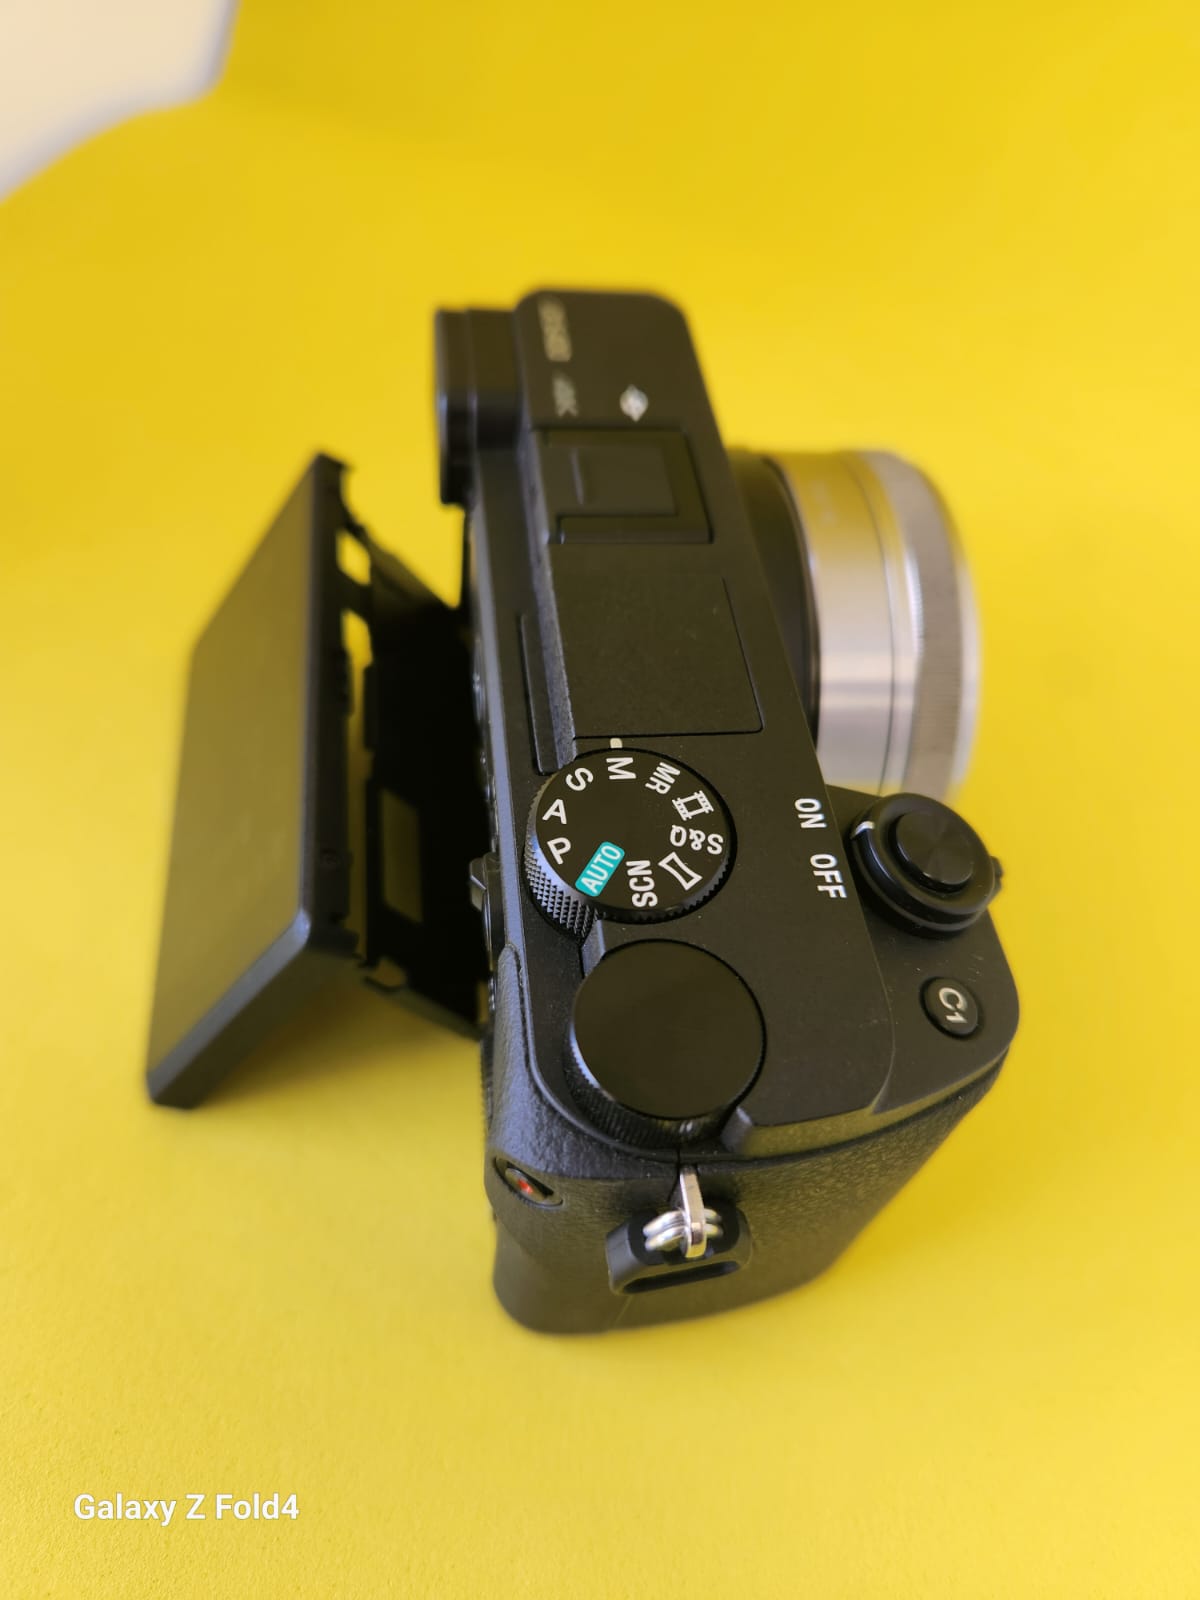 Used Sony a6400 Mirrorless Camera in Black with 16/2.8mm Lens